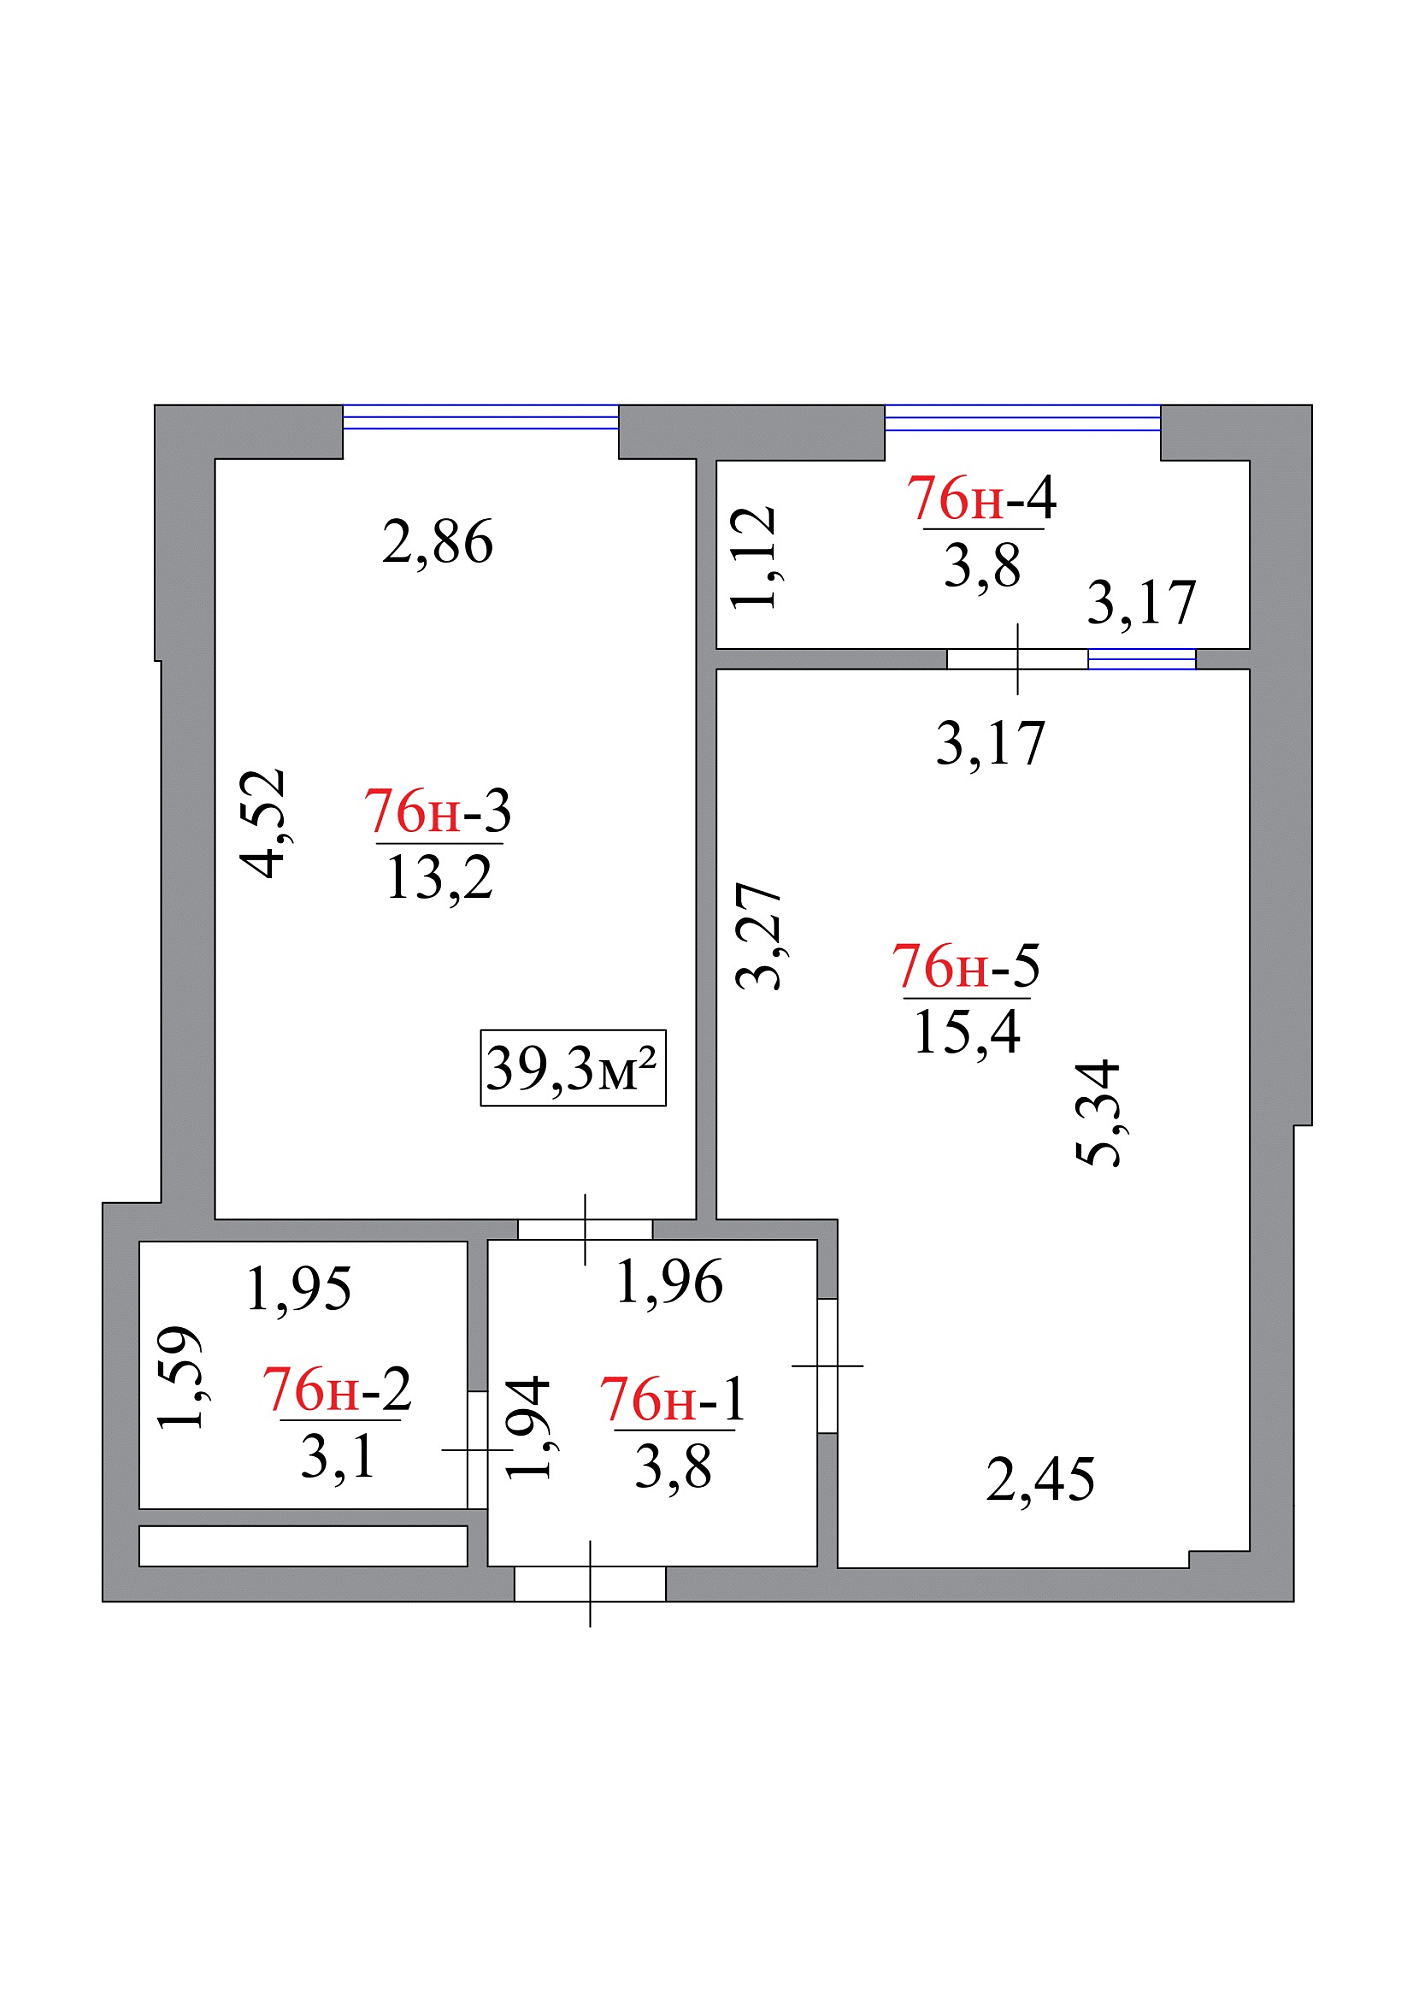 Planning 1-rm flats area 39.3m2, AB-07-08/00069.